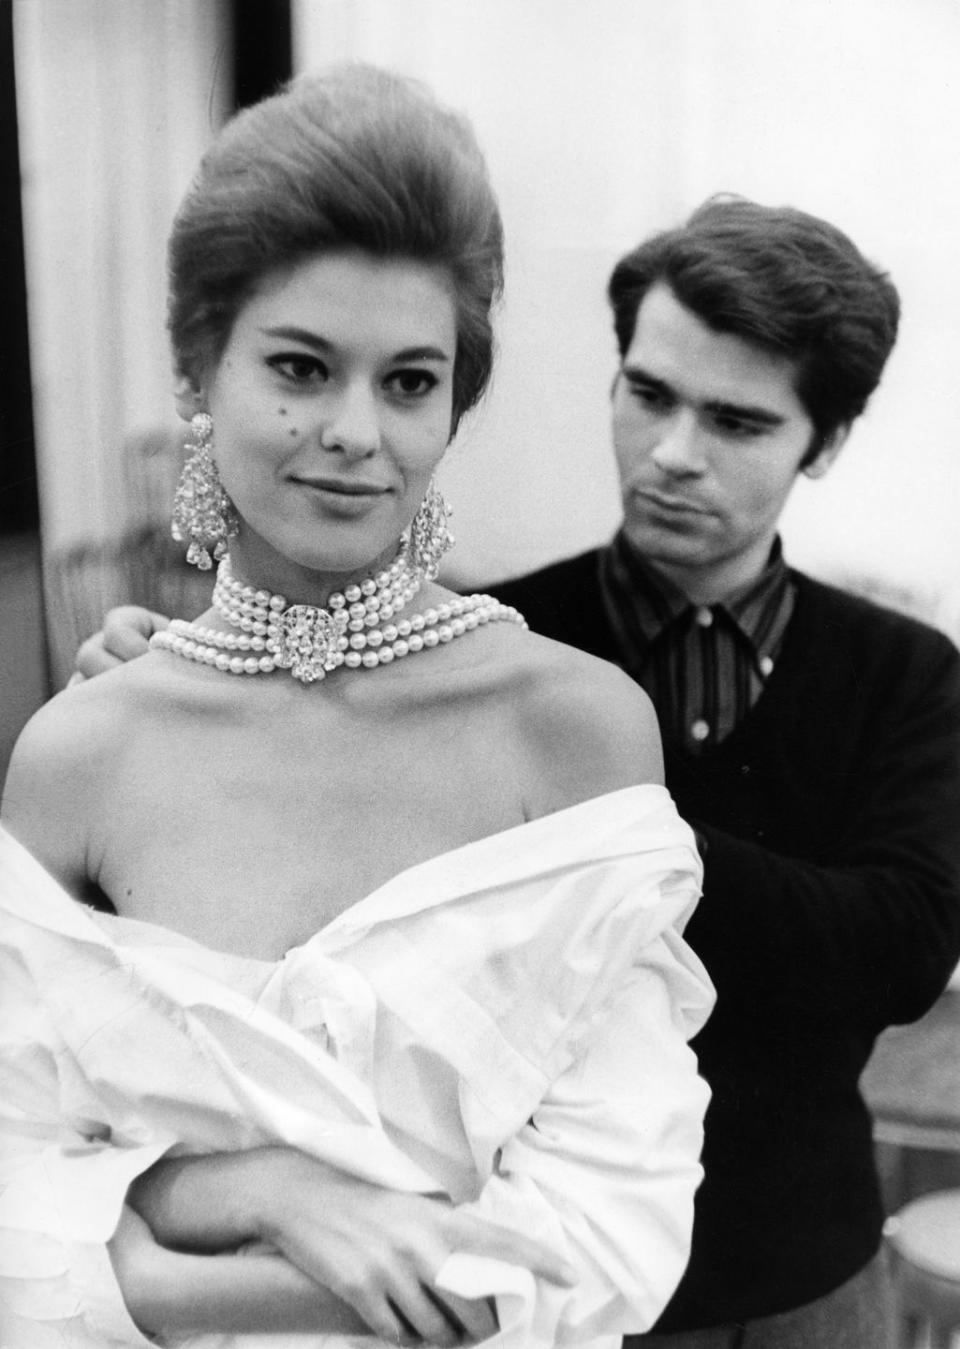 1960s: Lagerfeld Goes Freelance and Begins Key Relationships with Fendi & Chloé.